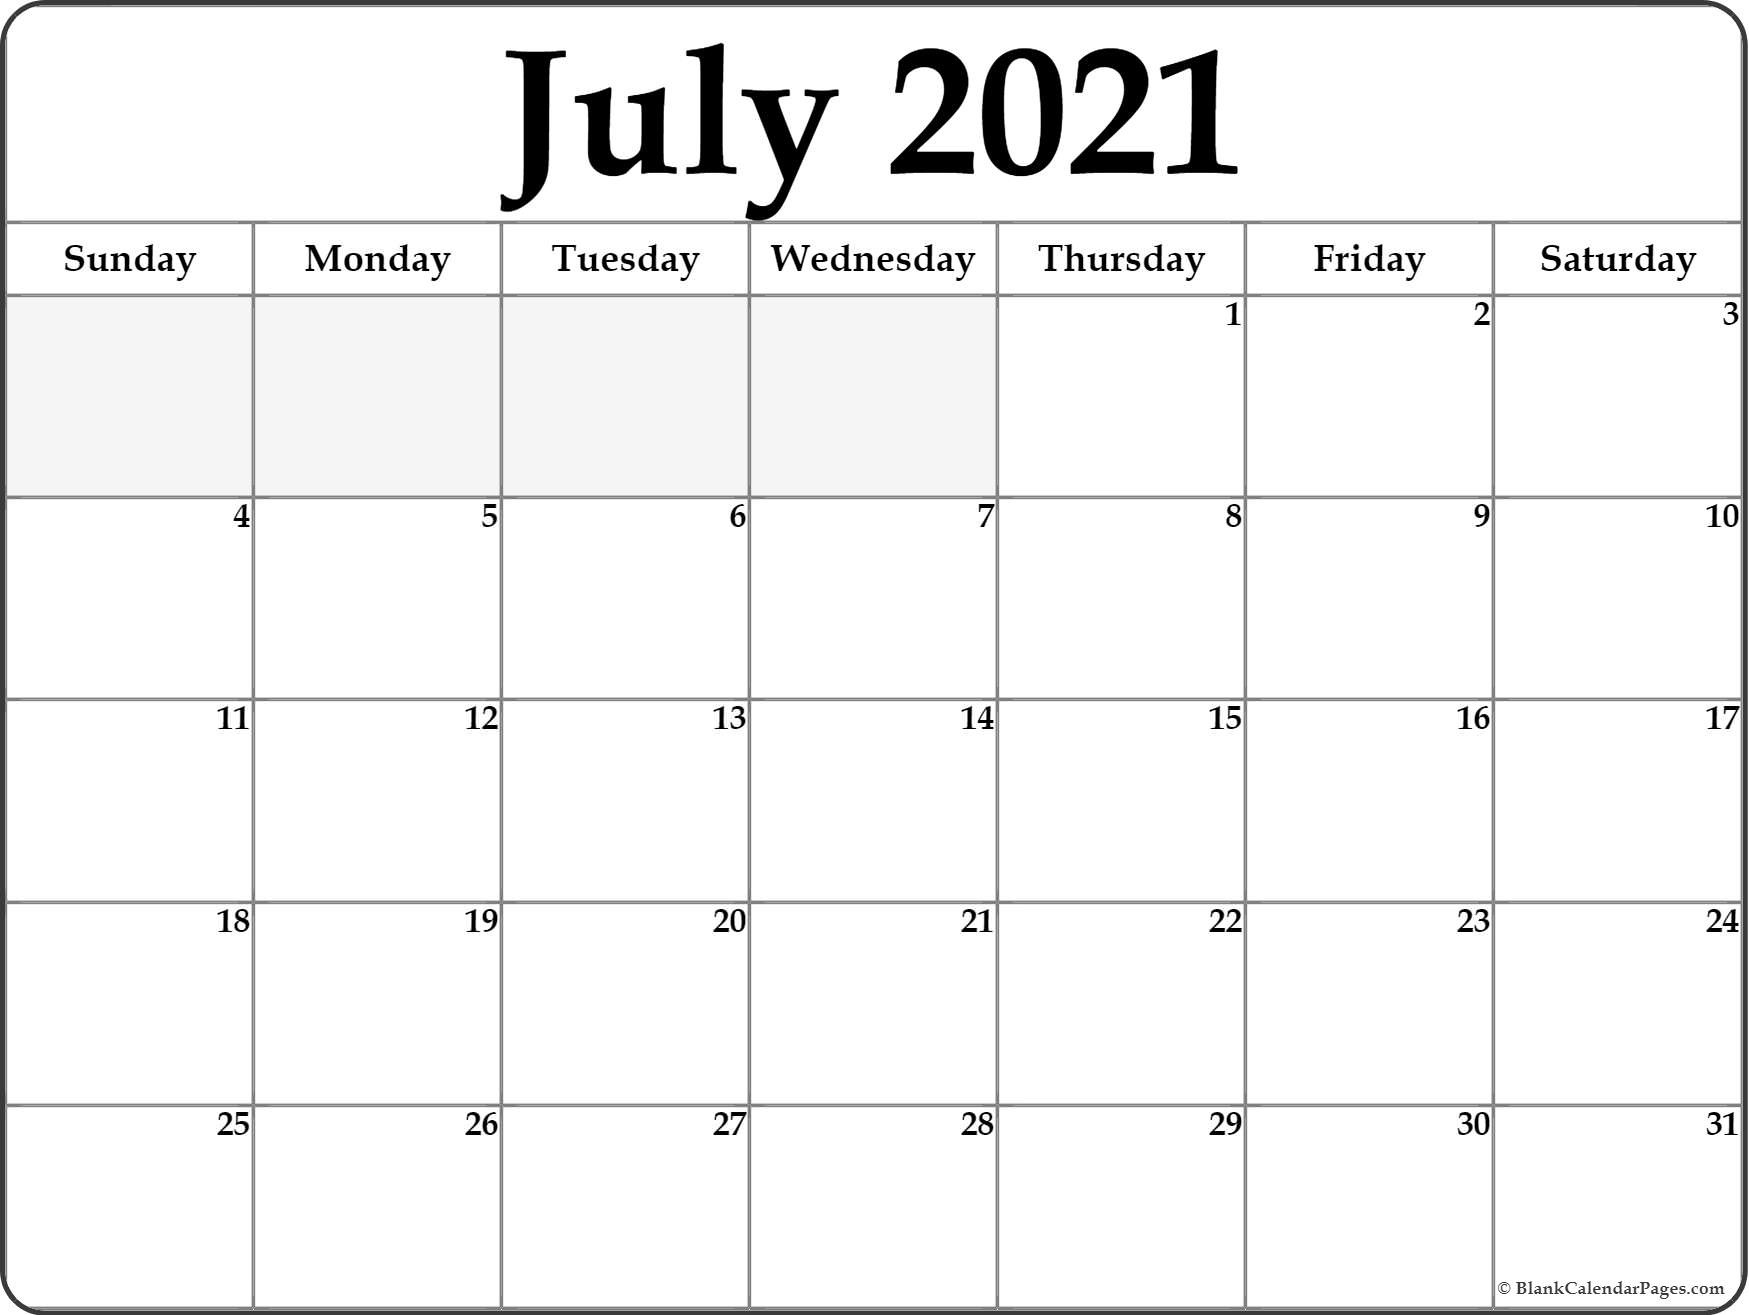 July 2021 Calendar | Free Printable Monthly Calendars-Printable Calendar July 2021 And August 2021